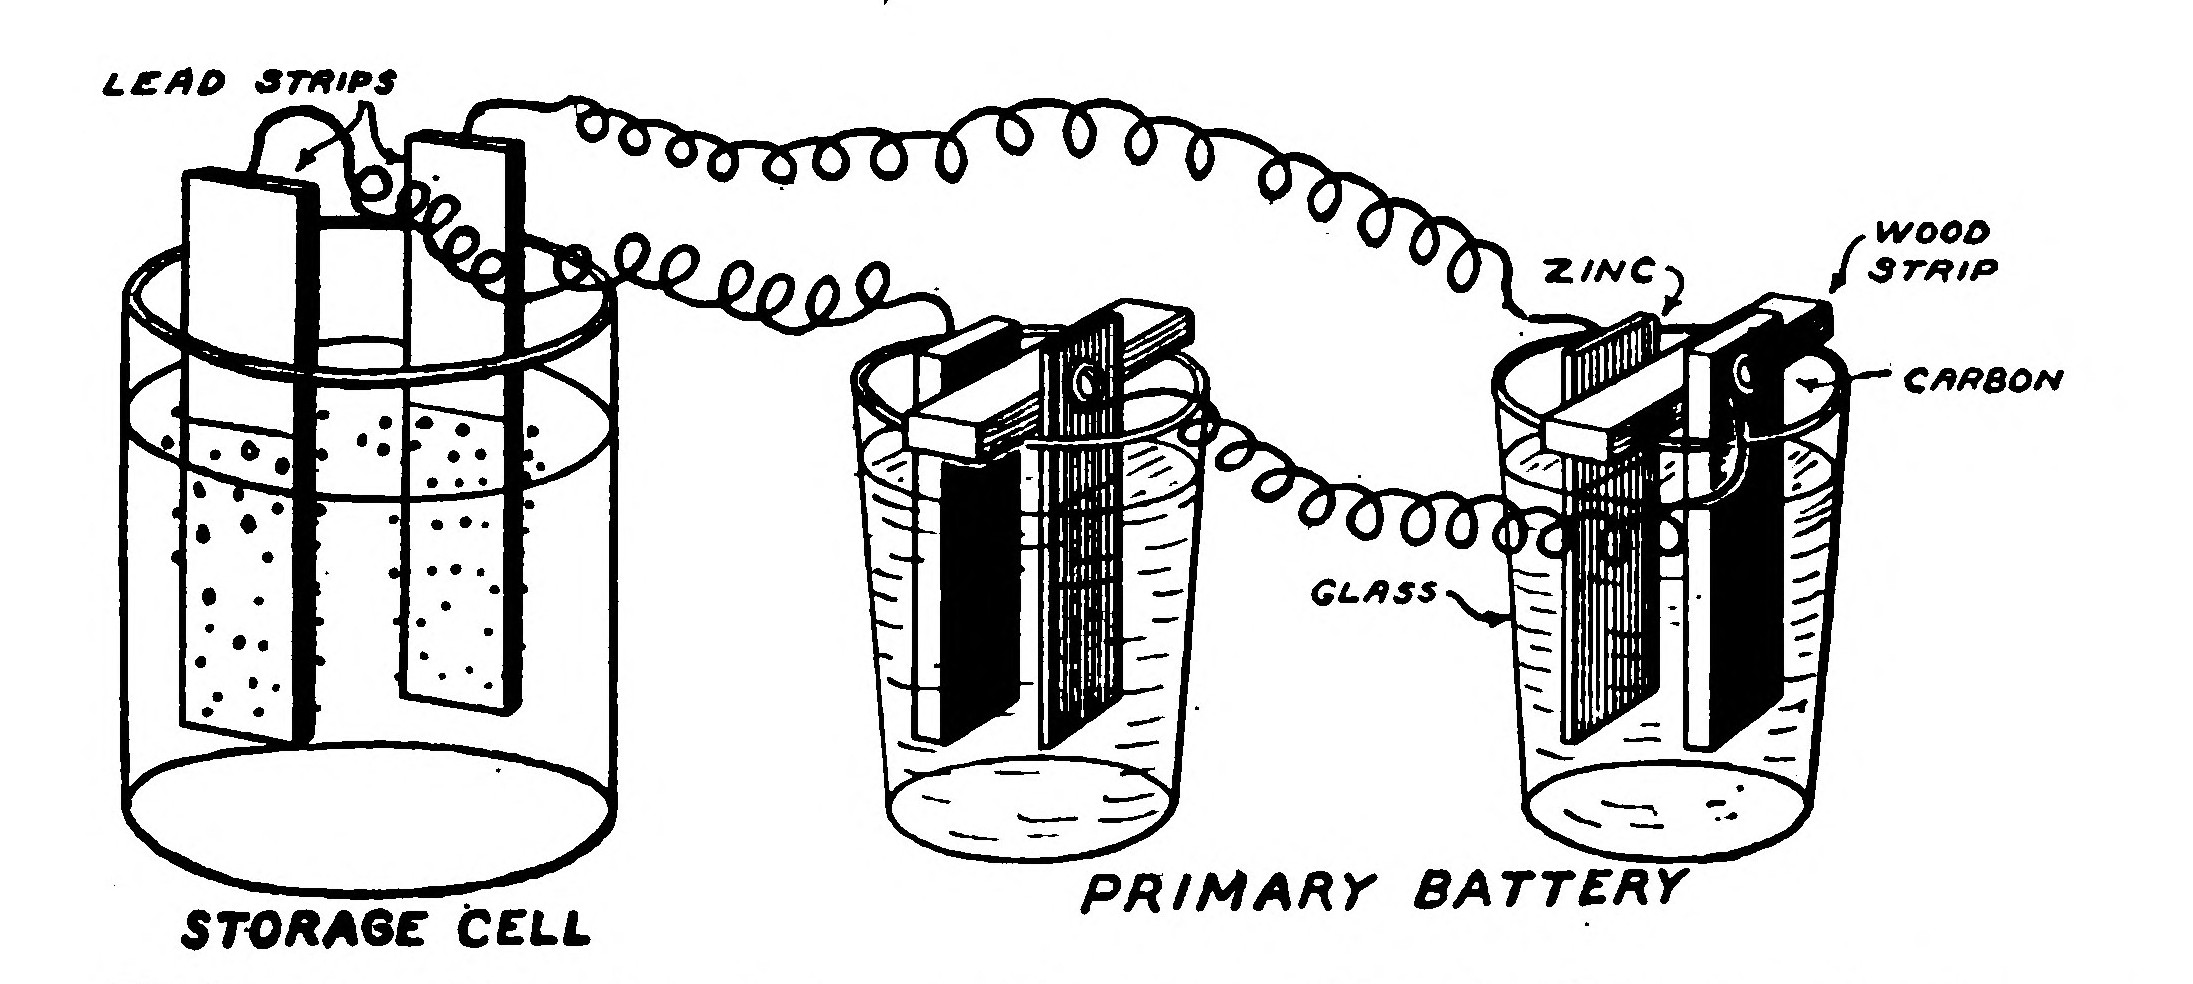 FIG. 38.—Showing how to charge a Simple Storage Cell composed of two Lead Plates immersed in Sulphuric Acid by connecting it to two Bichromate of Potash Cells.